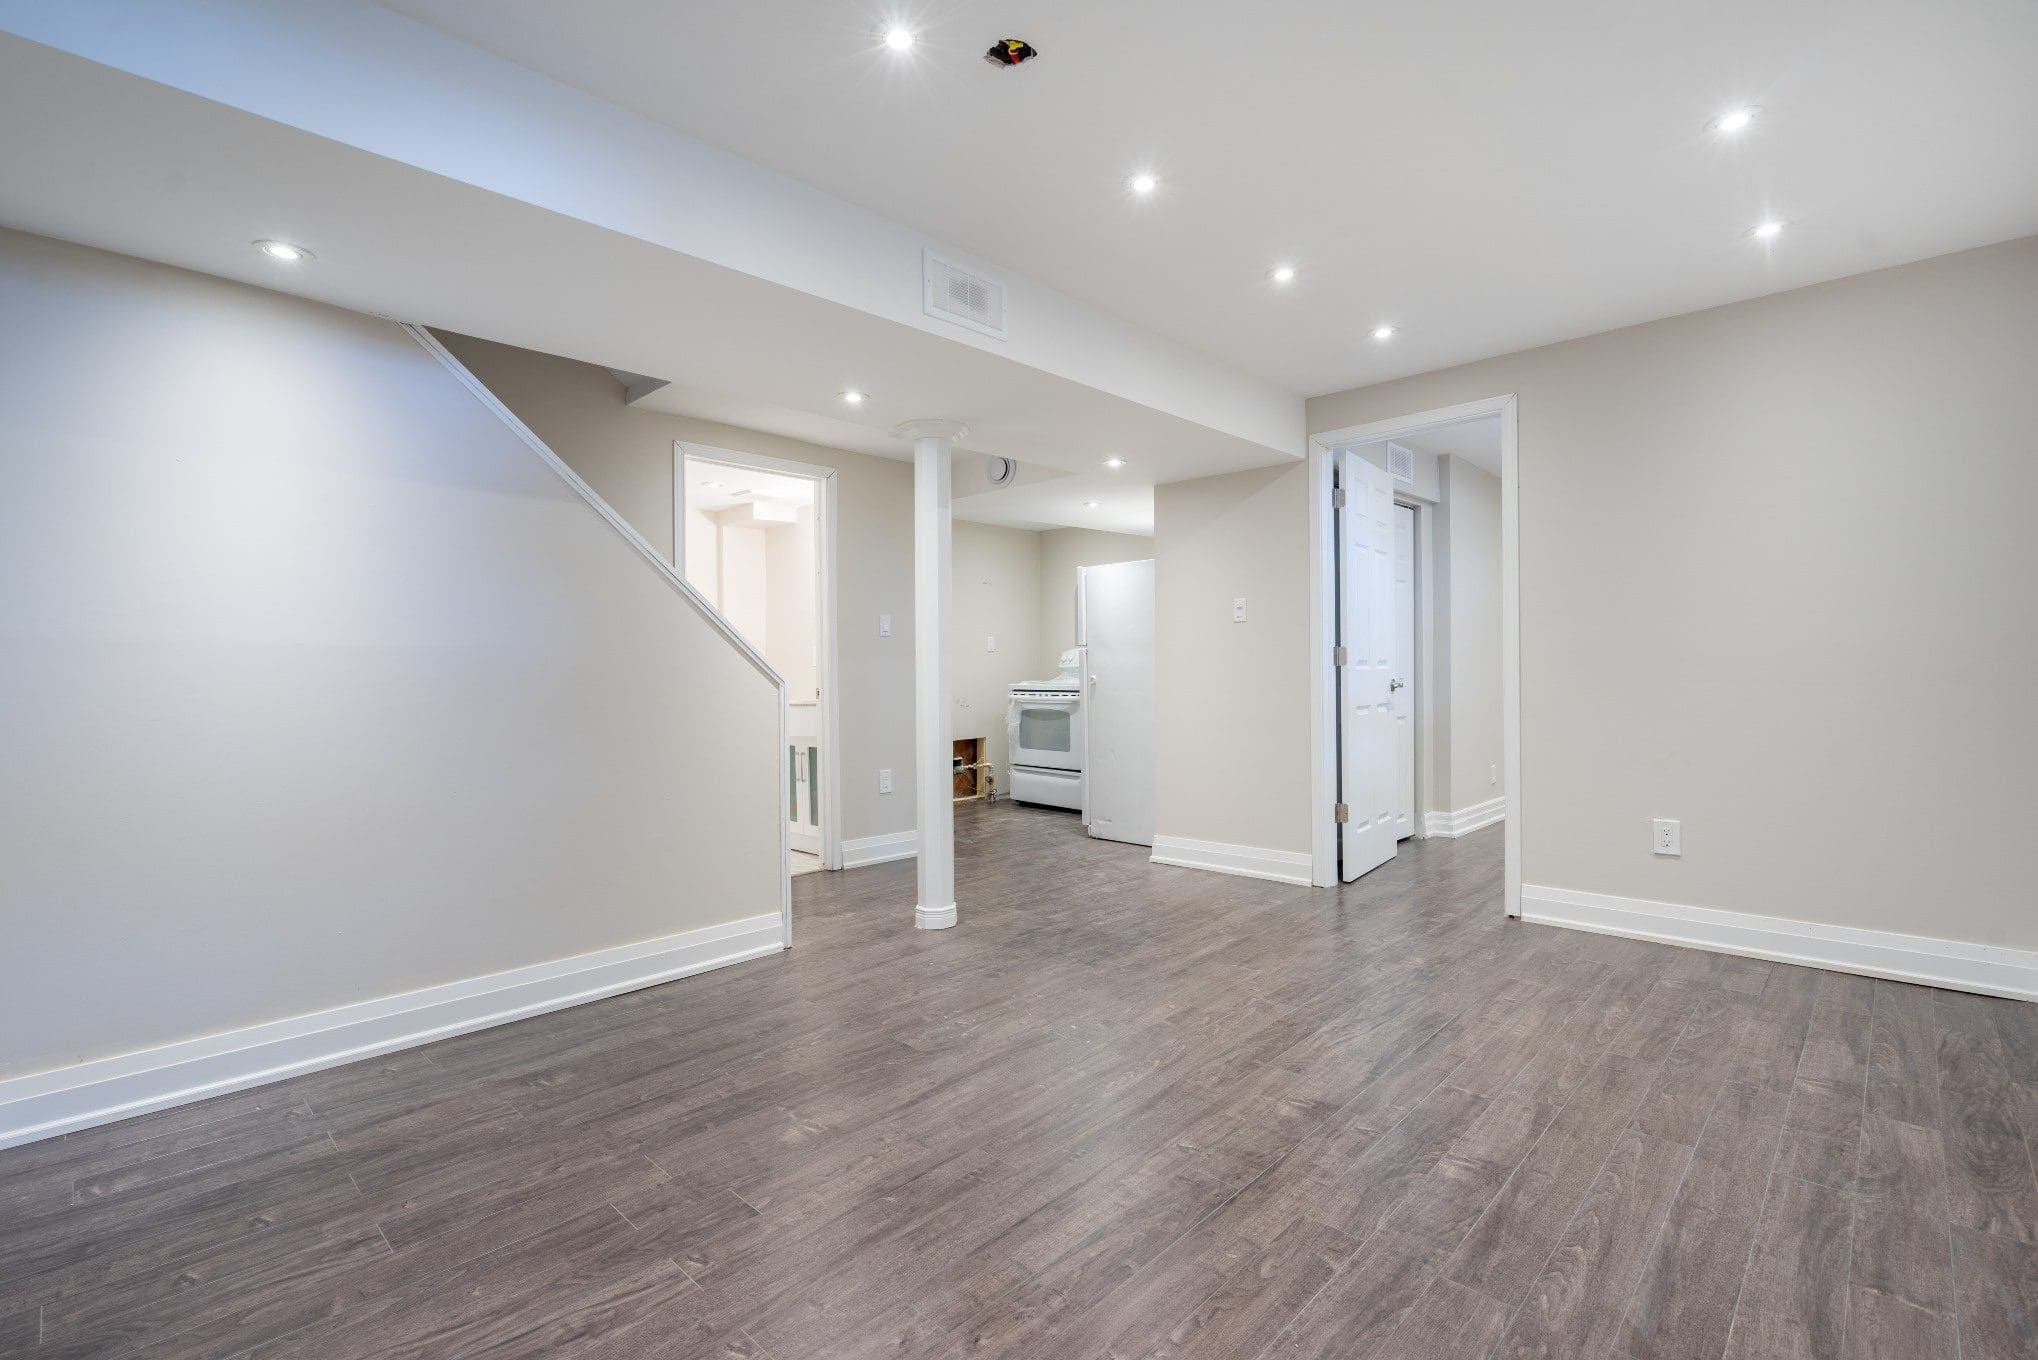 But unfortunately the basement finishing and remodeling process can be extremely stressful and costly. Benefits Of Finished Basement Get Extra From Your Basement